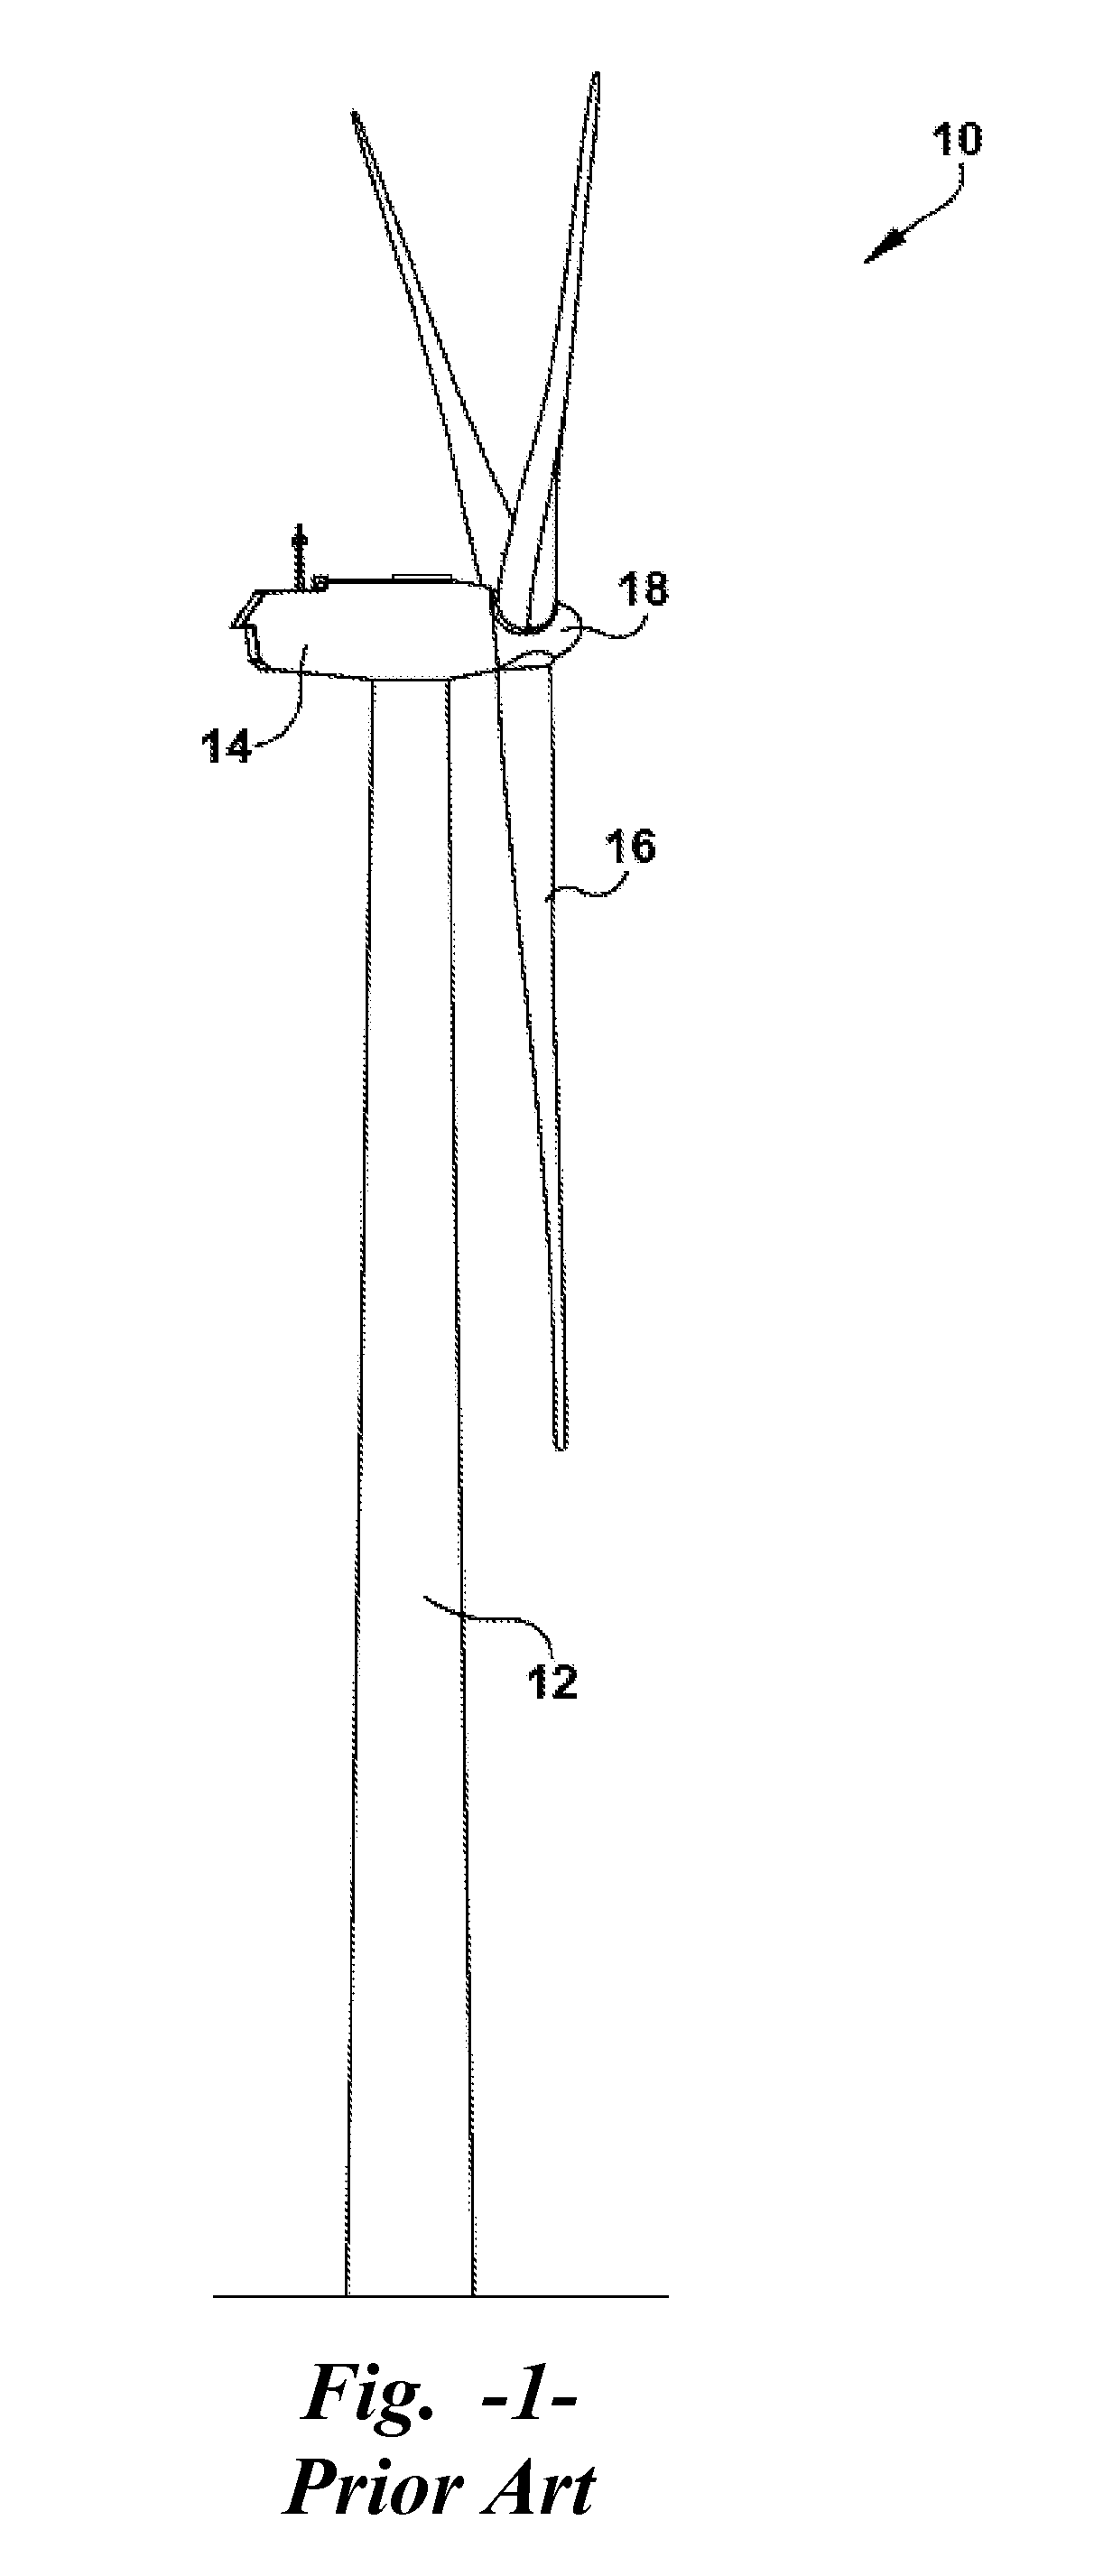 Wind turbine blade shear web connection assembly